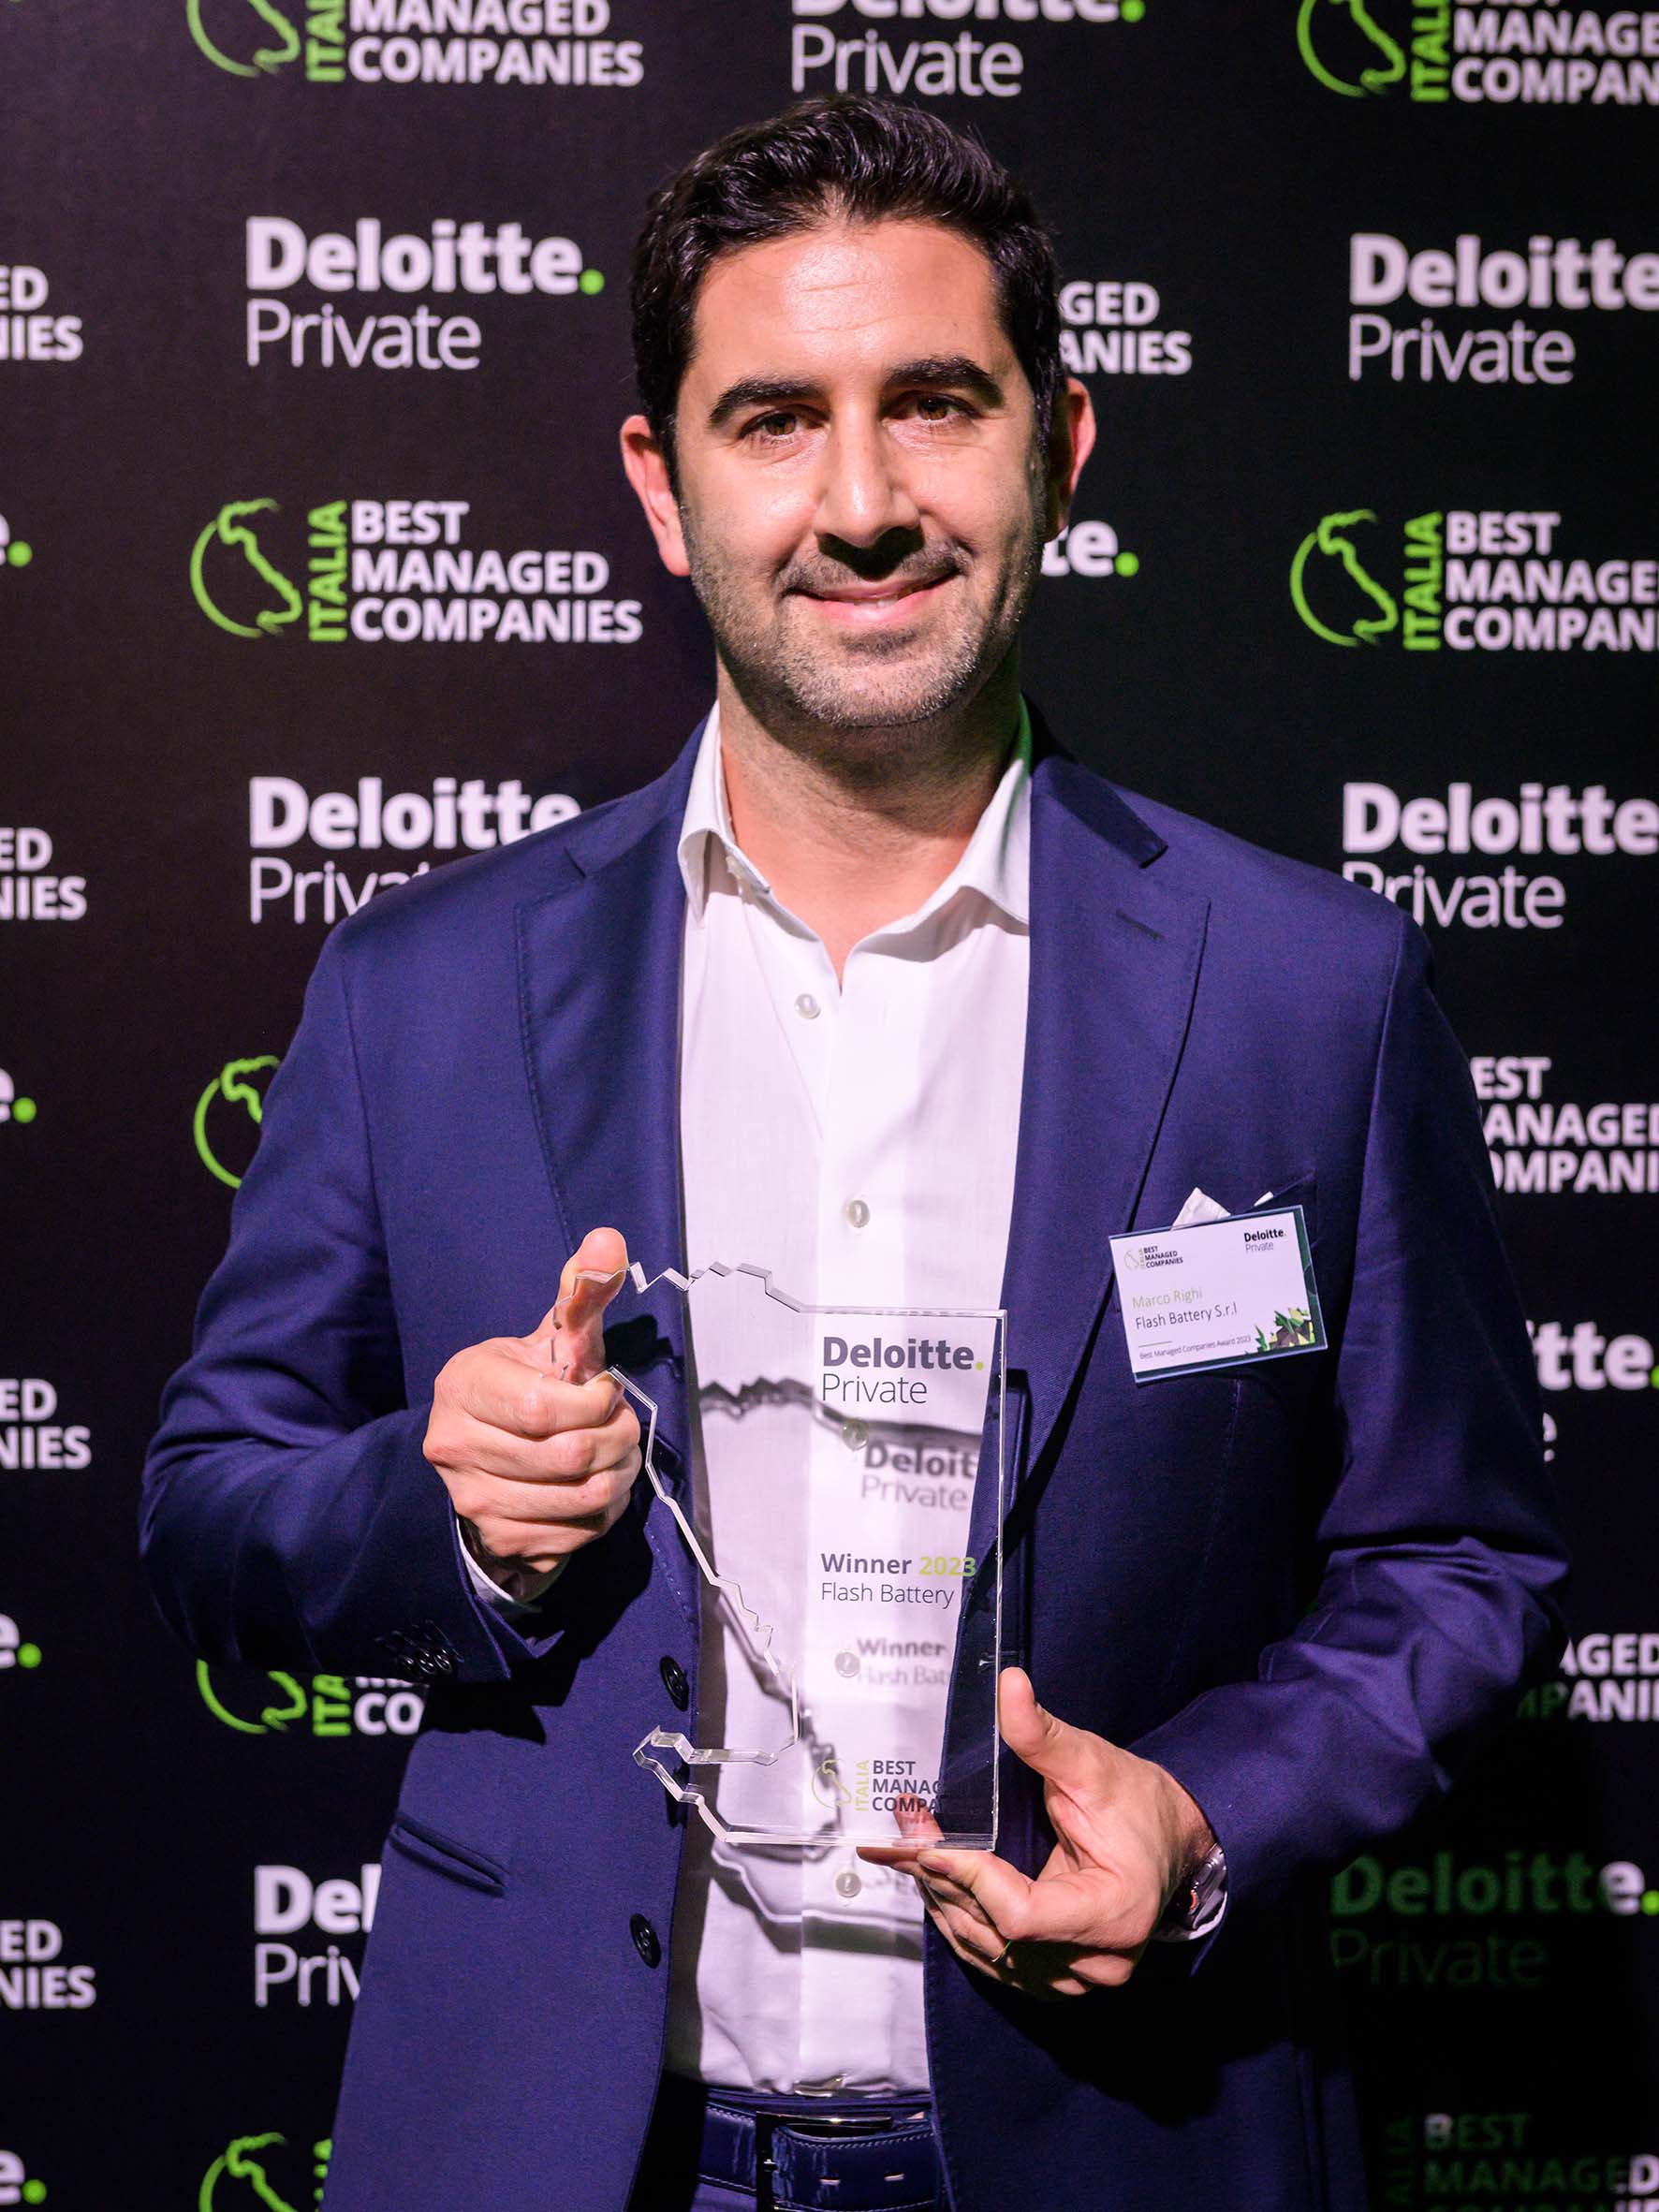 flash battery deloitte best managed company award ceo marco righi